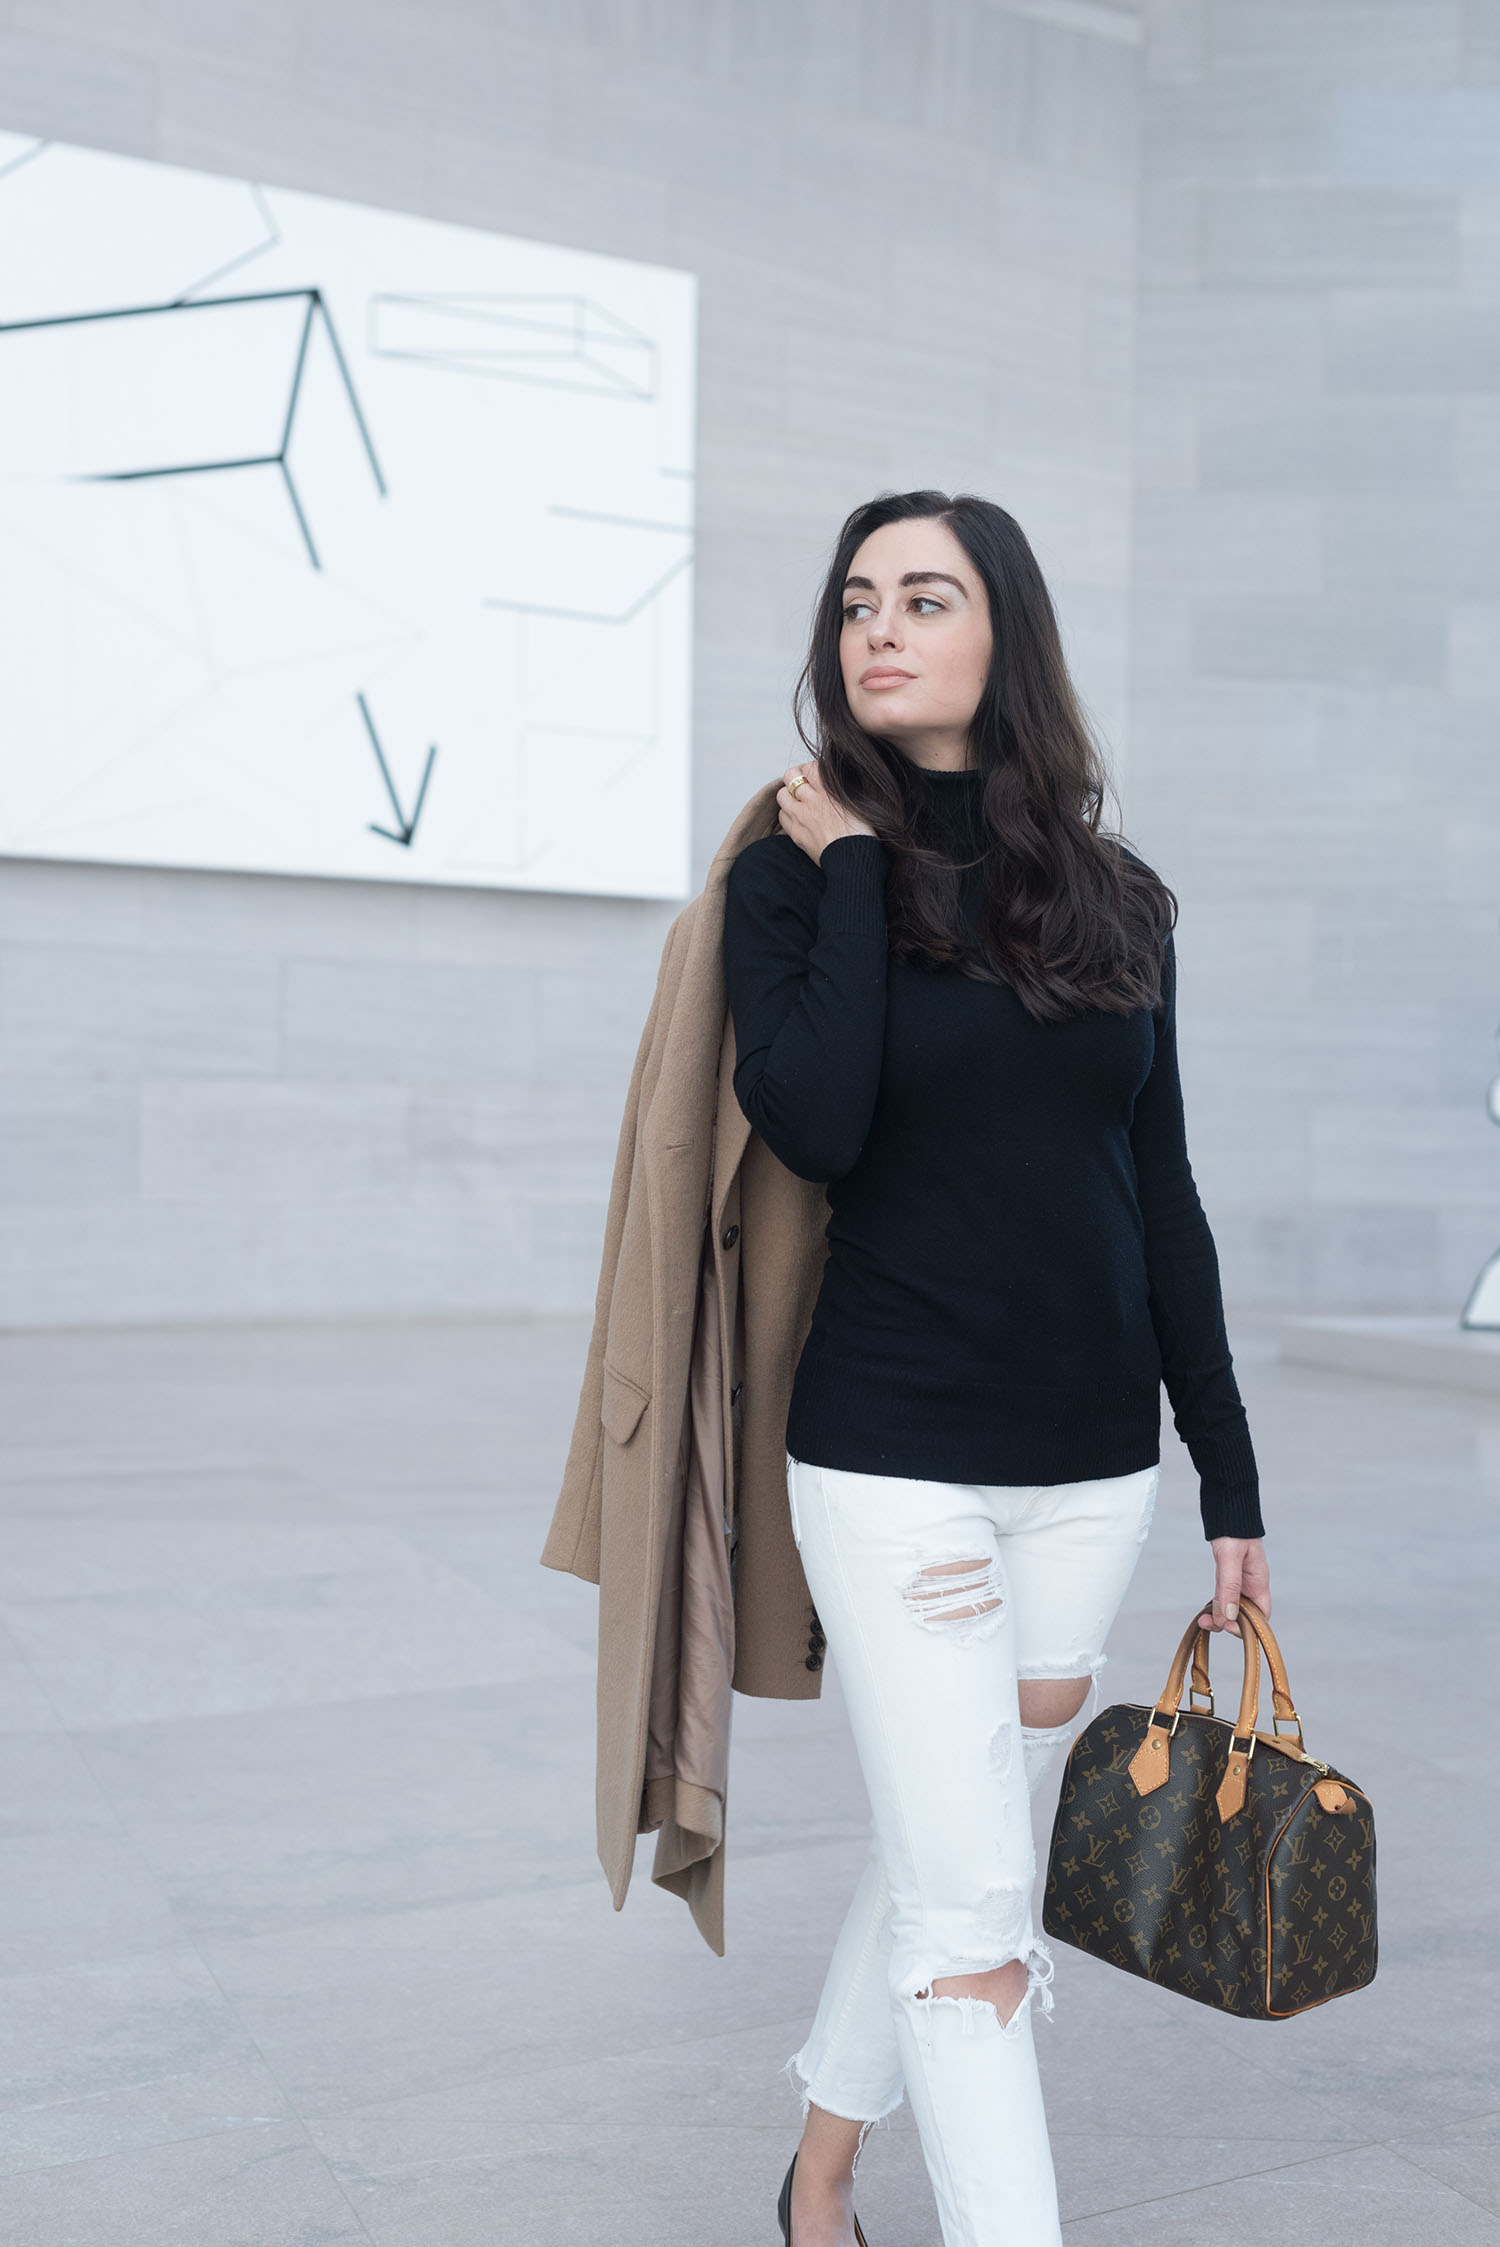 Portrait of Canadian fashion blogger Cee Fardoe of Coco & Vera at the National Gallery of Art in Washington DC, wearing Grlfrnd Karolina jeans and a Le Chateau turtleneck sweater